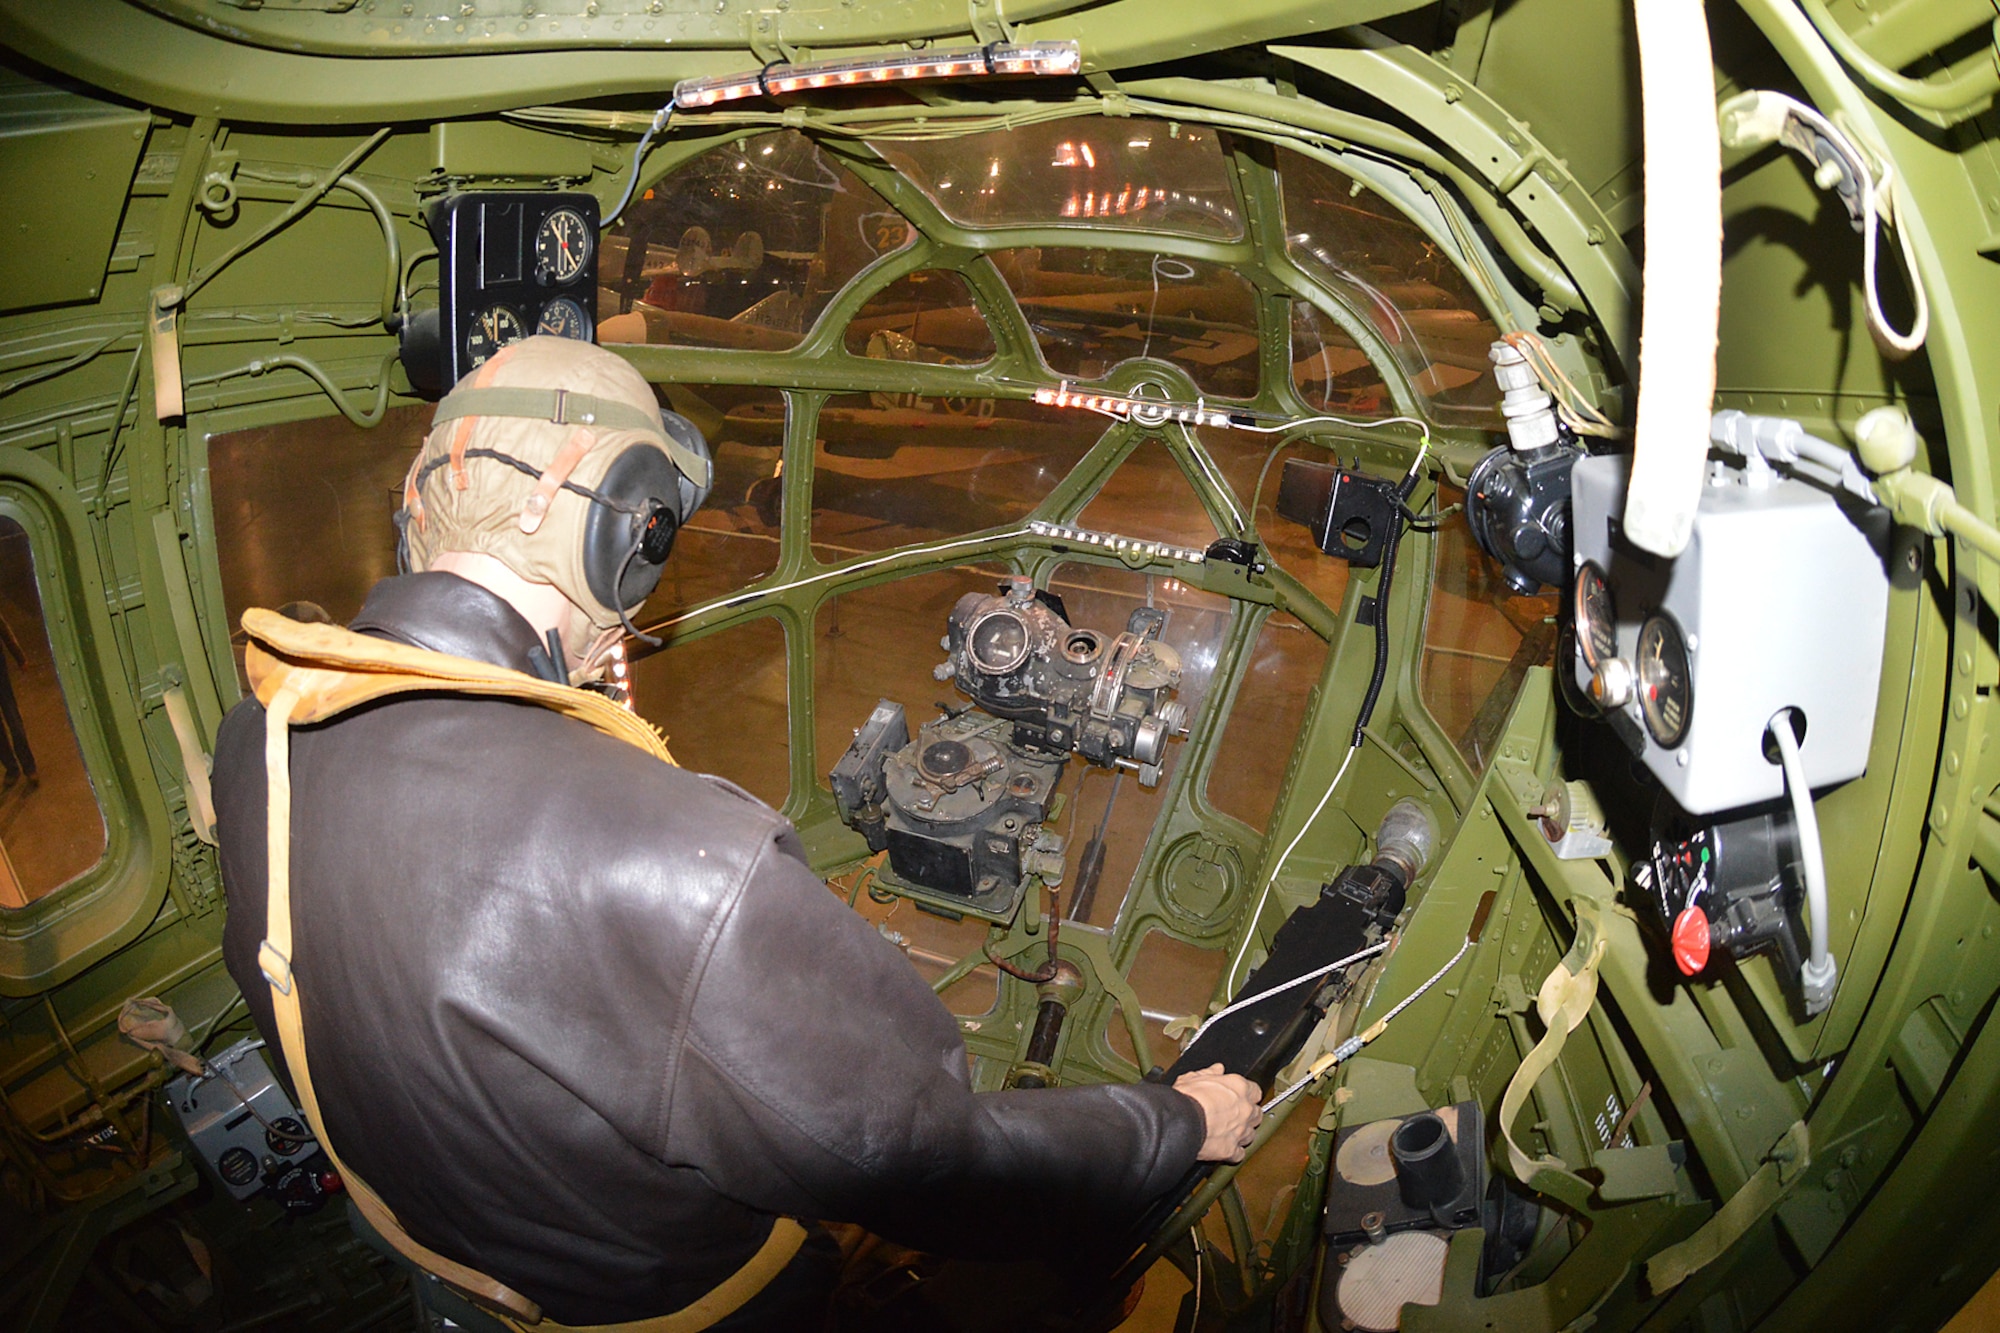 DAYTON, Ohio - Consolidated B-24D bombardier position at the National Museum of the U.S. Air Force. (U.S. Air Force photo)
